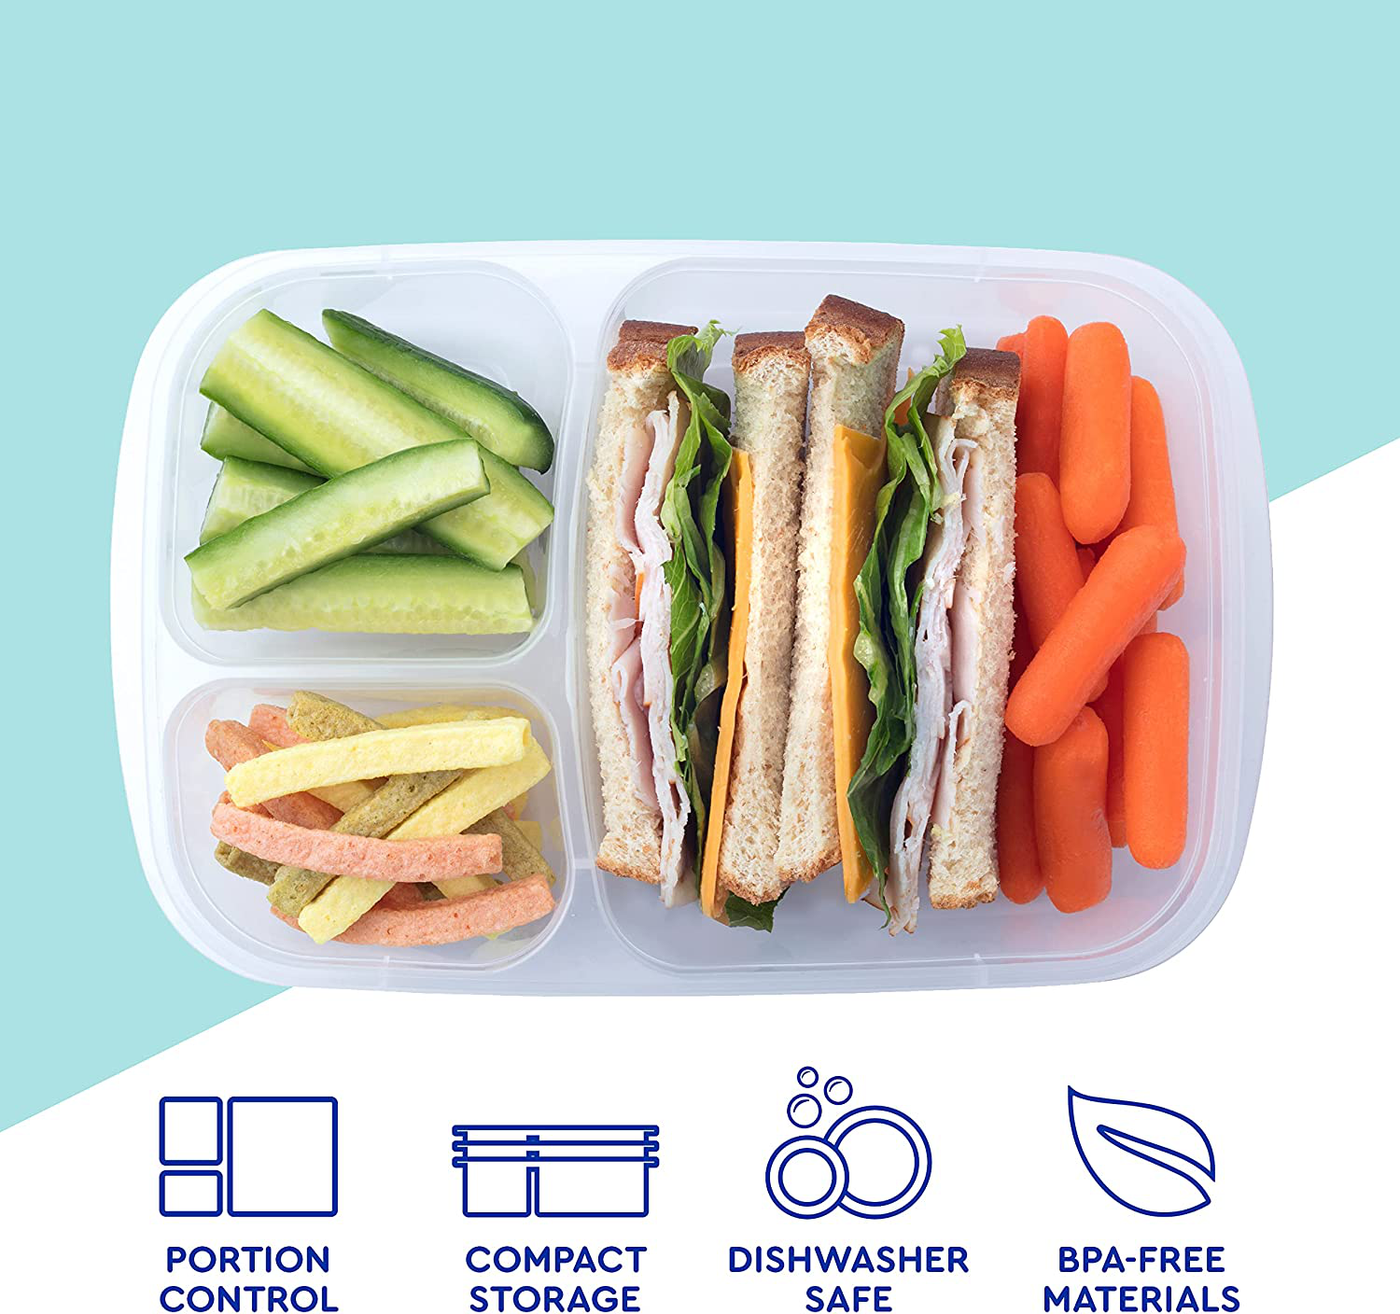 EasyLunchboxes - Bento Lunch Boxes - Reusable 3-Compartment Food Containers for School, Work, and Travel, Set of 4, Classic